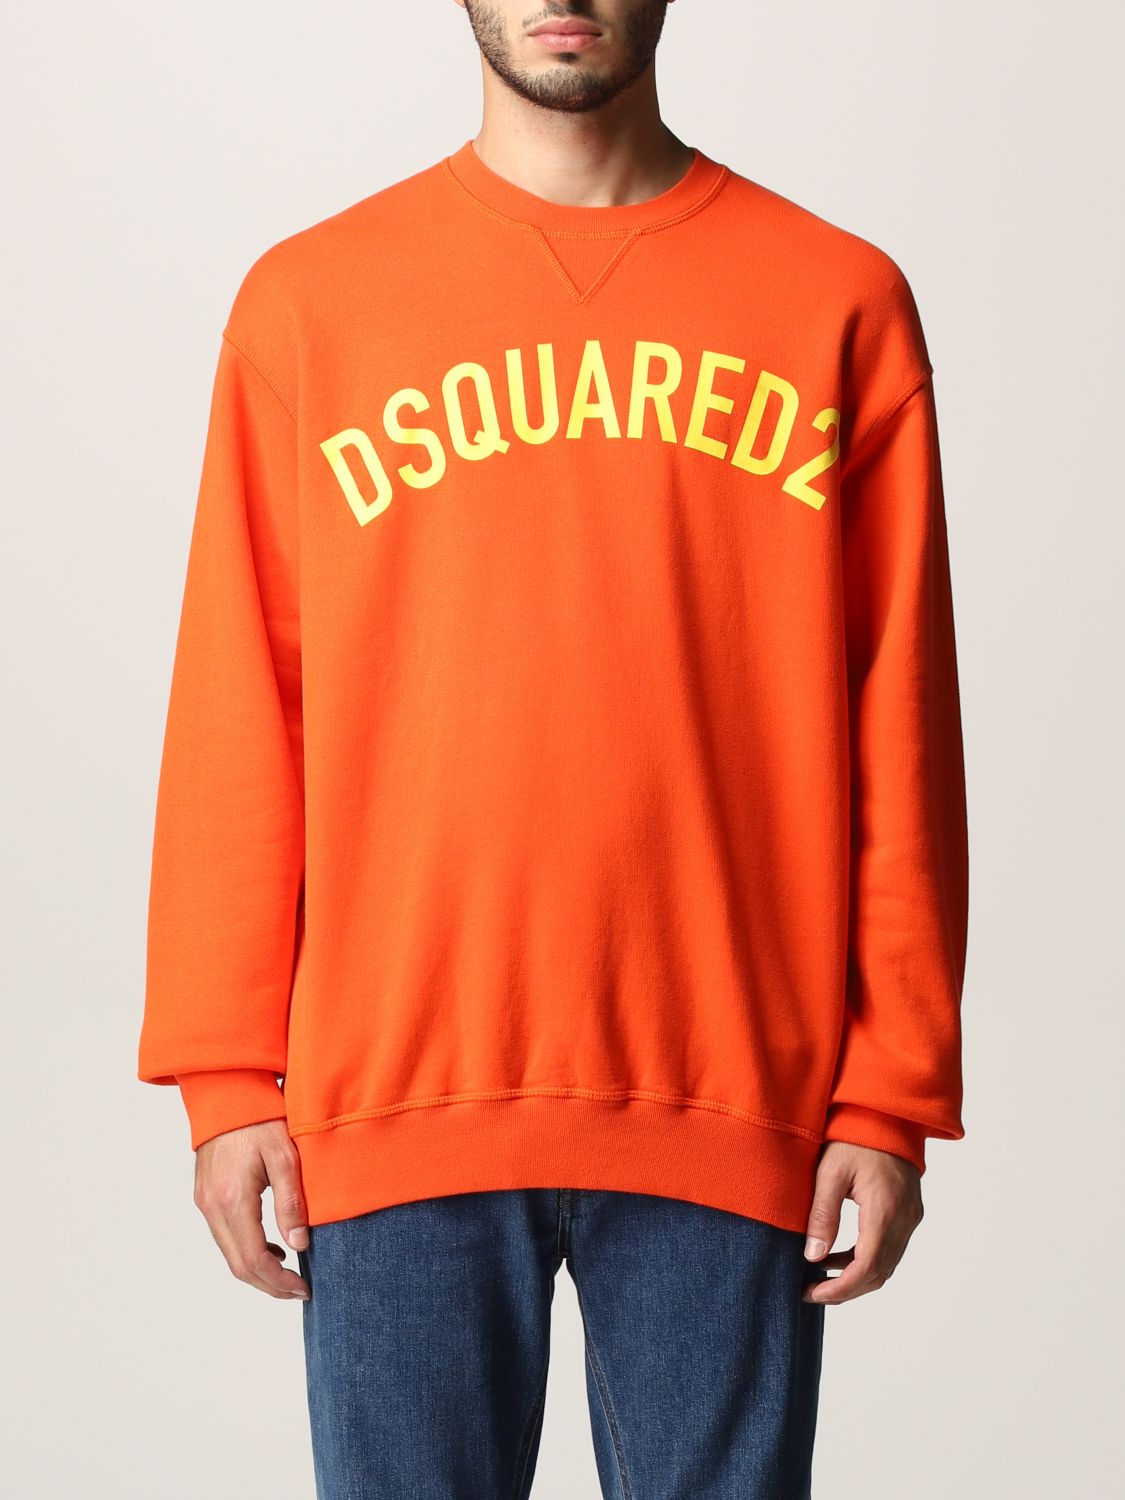 dsquared 2 pullover Off 79% - www.loverethymno.com